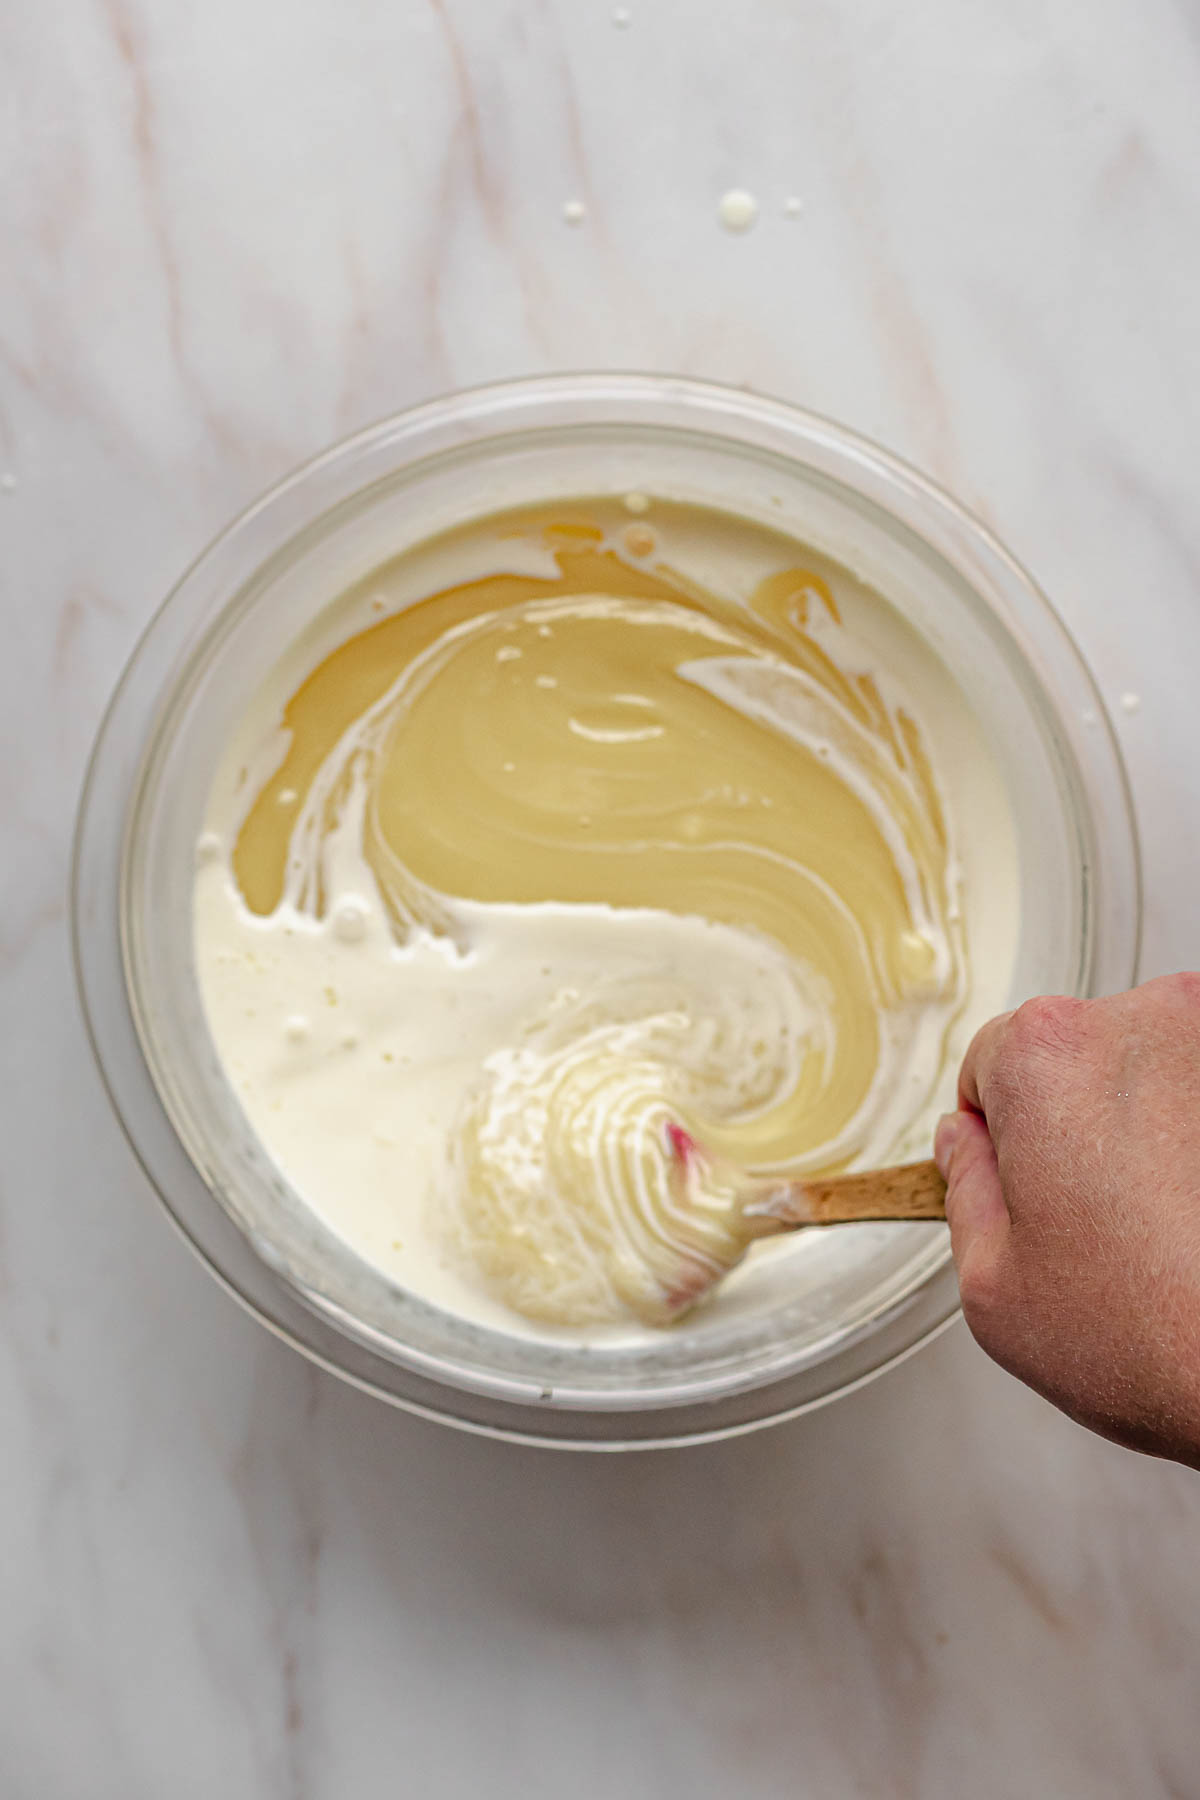 A hand mixes together melted white chocolate and heavy cream.